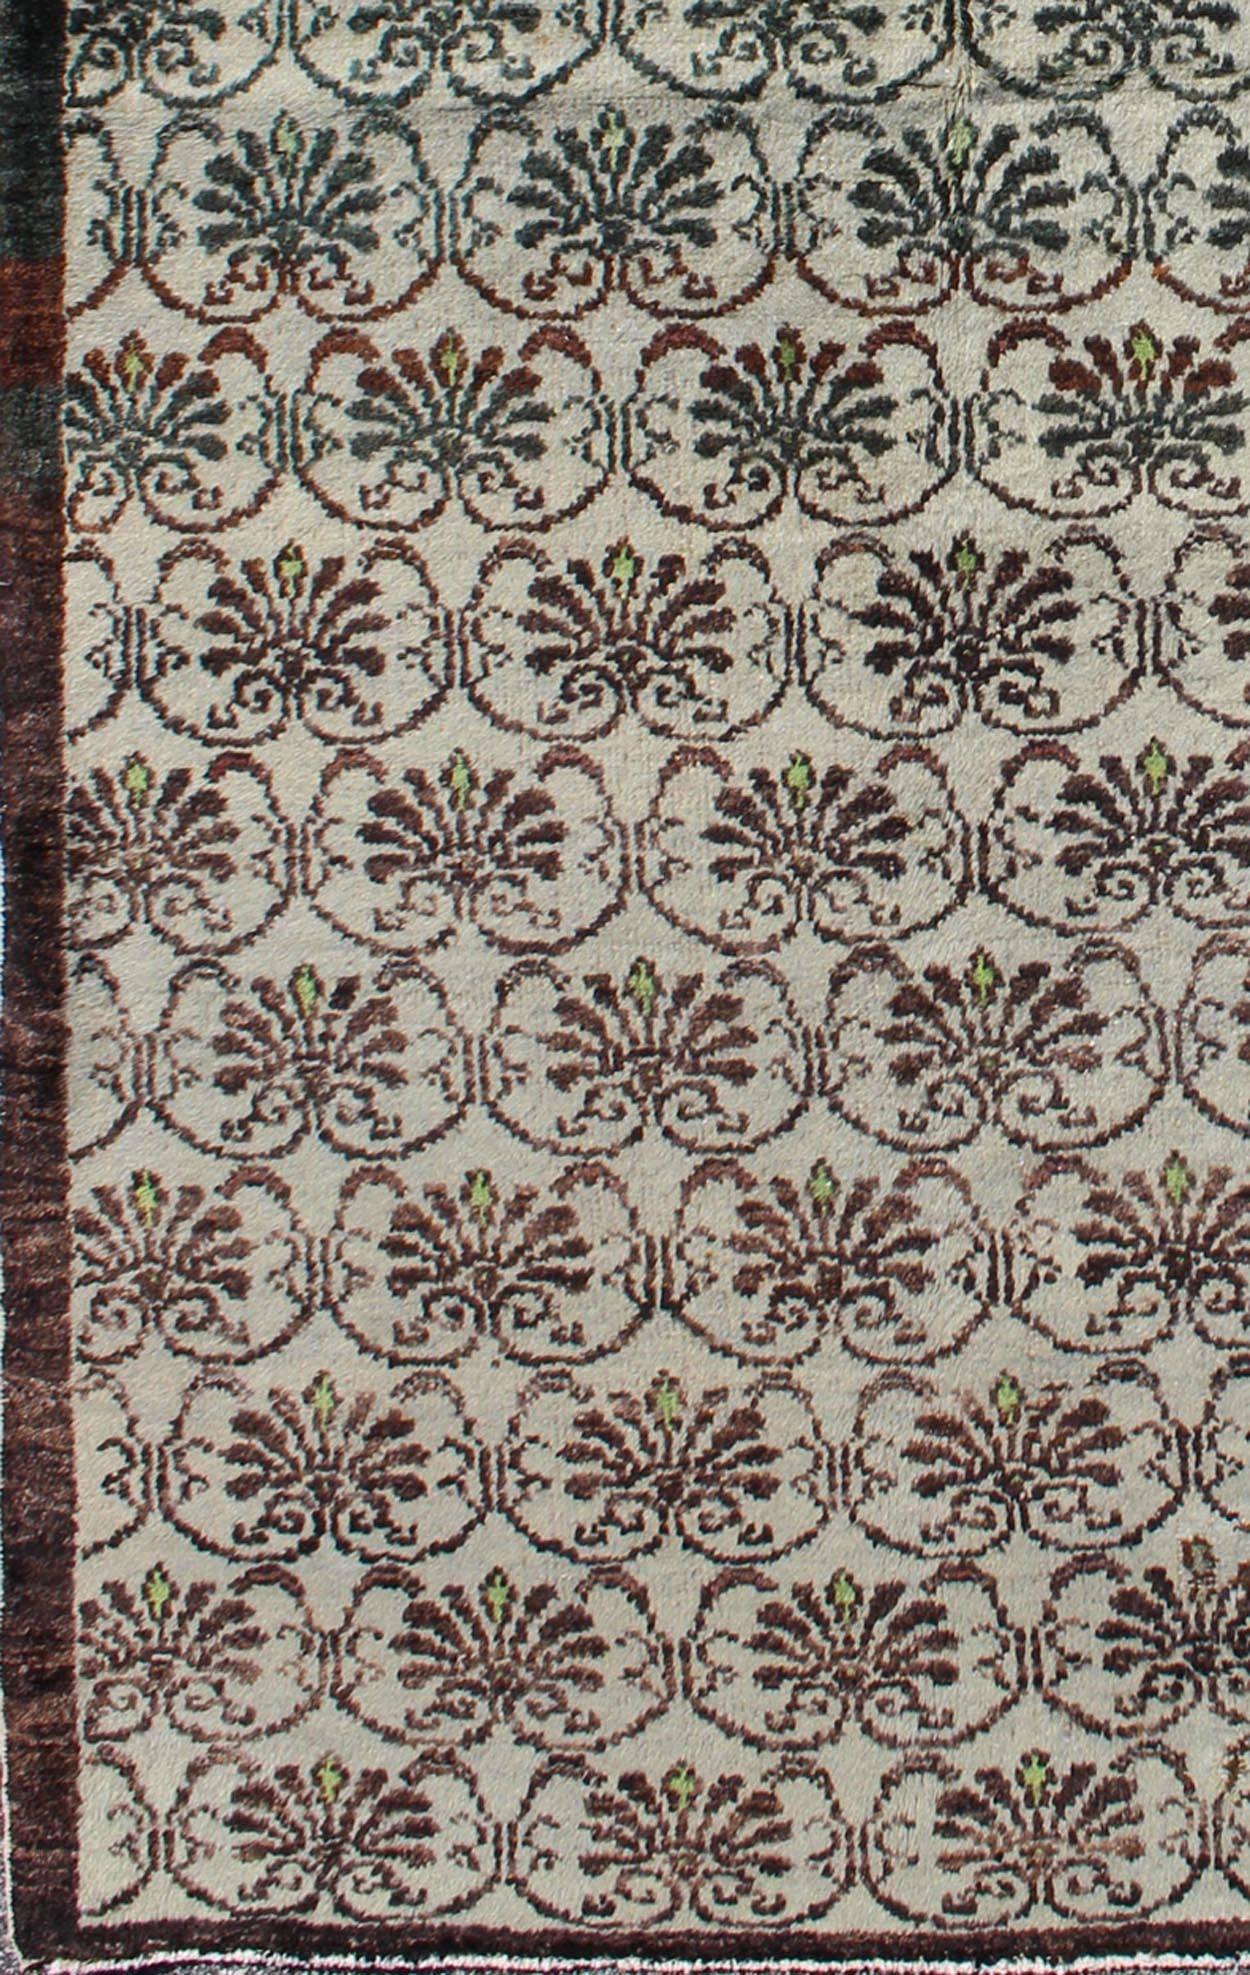 This Oushak carpet (circa mid-20th century) features an all-over pattern of interconnected, vertically-arranged vining blossoms. Colors include chocolate brown with hints of green set on an ivory background.

Measures: 3'4'' x 6'5''.

Vintage